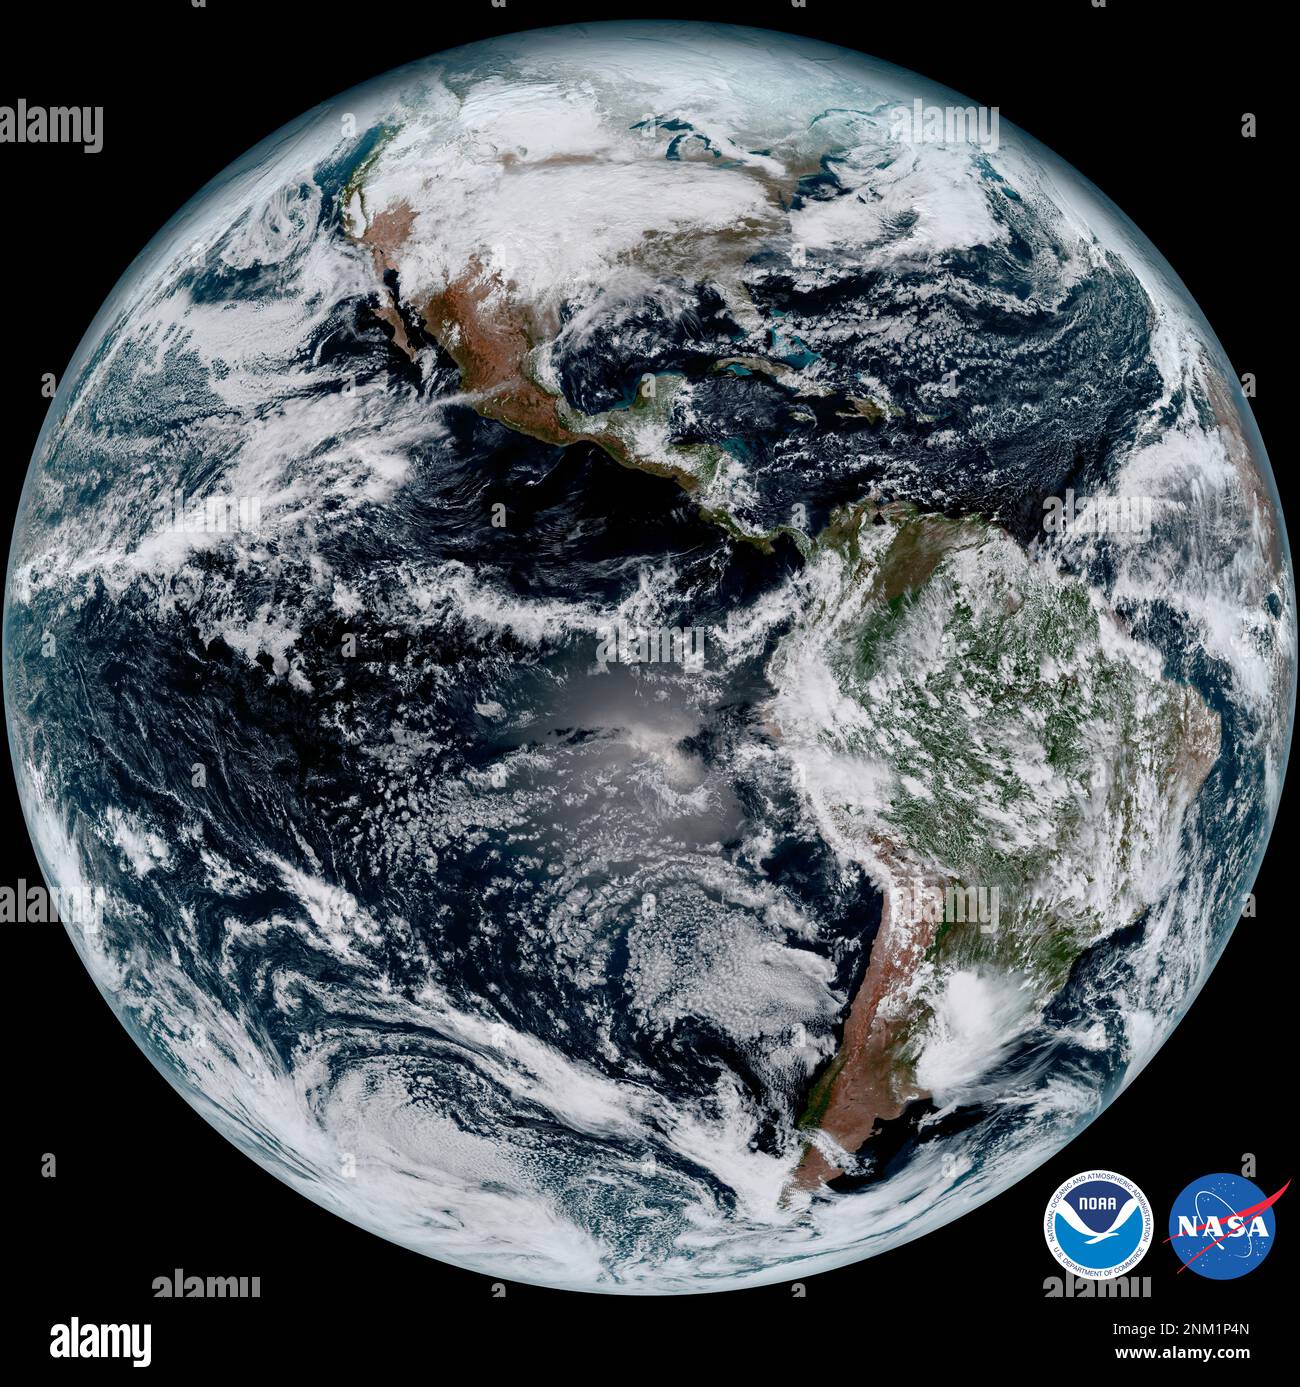 This composite color full-disk visible image of the Western Hemisphere was captured from NOAA GOES-16 satellite at 1:07 pm EST on Jan. 15, 2017 and created using several of the 16 spectral channels available on the satellite's sophisticated Advanced Baseline Imager. The image shows North and South America and the surrounding oceans ca. 15 January 2017 Stock Photo